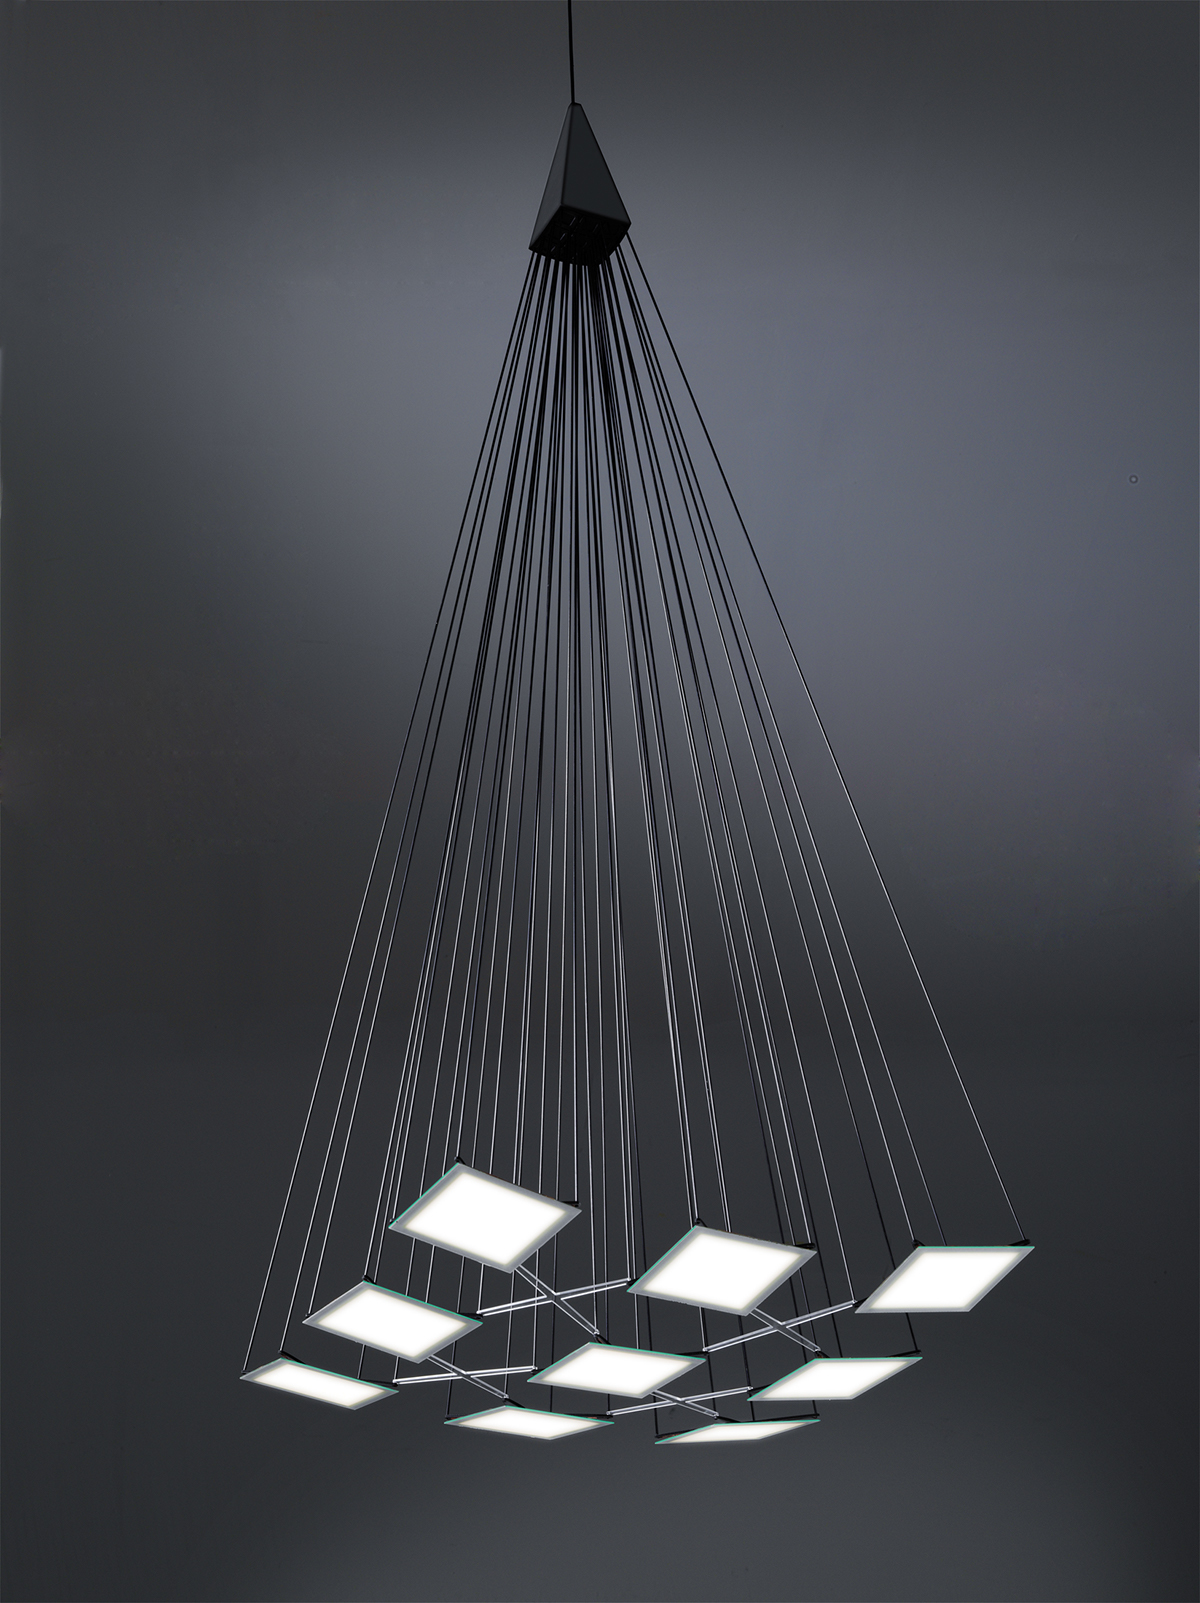 Rome Italy italian Mitsubishi carbon fibers composite material OLED Technology light Lamp ceiling hanging modulat